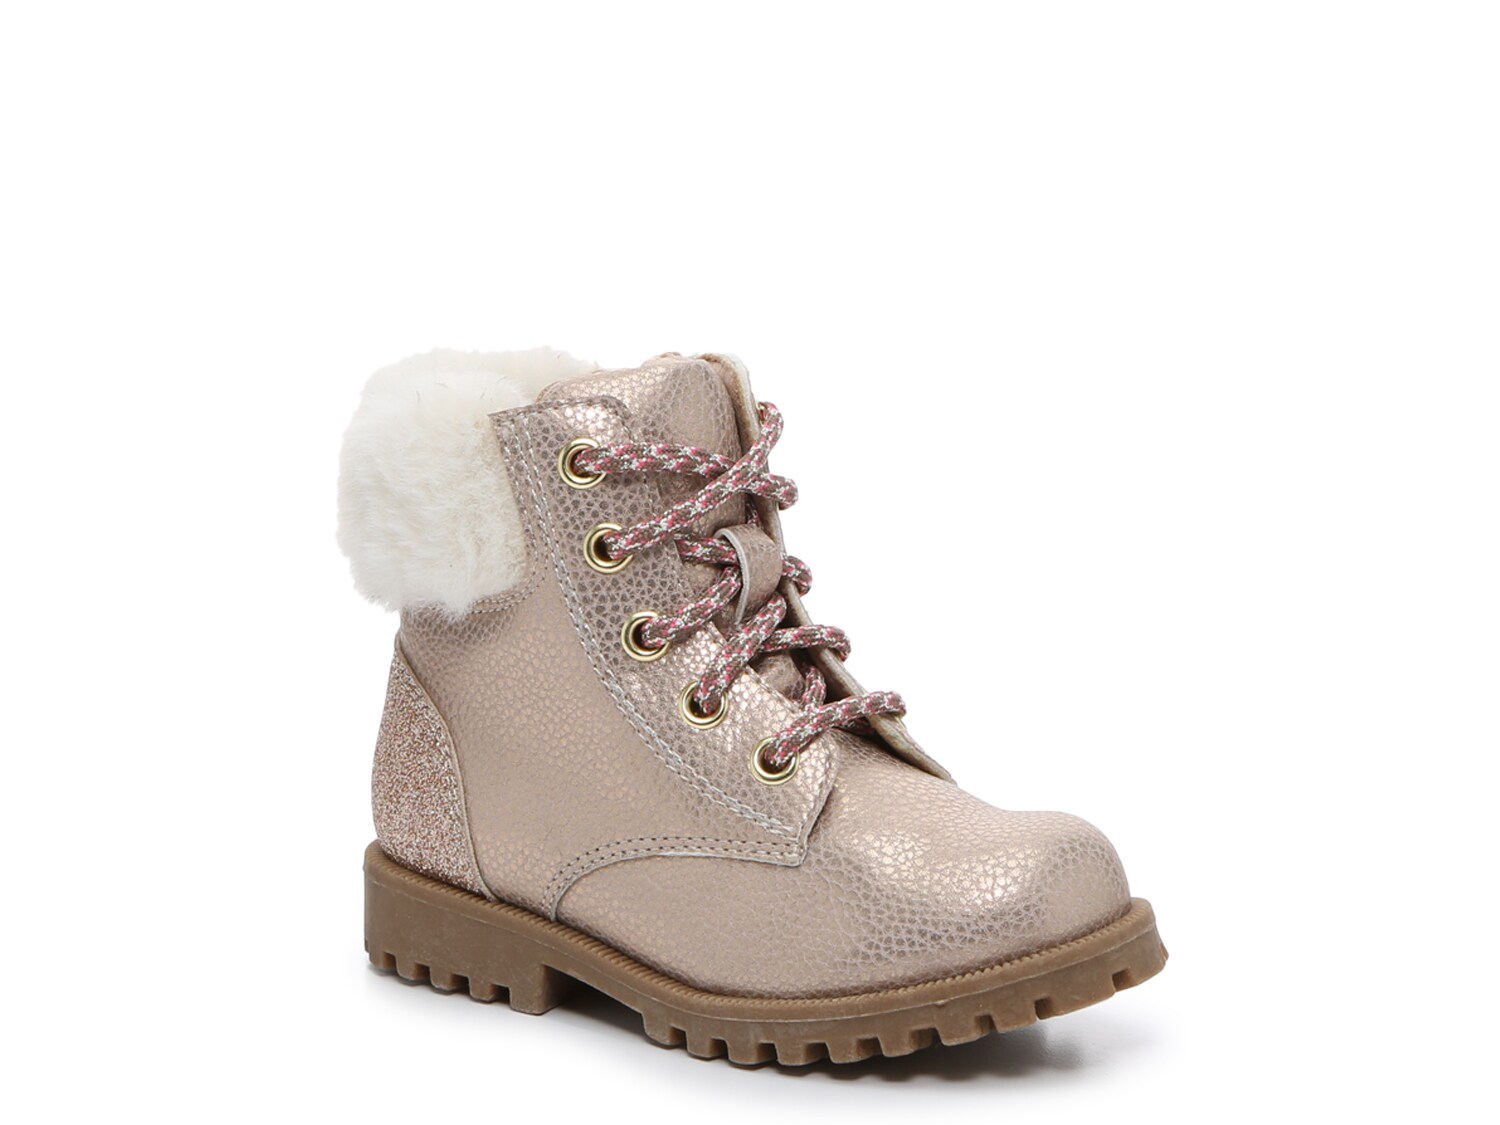 Olive & Edie Lil Haleigh Boot - Kids' - Free Shipping | DSW